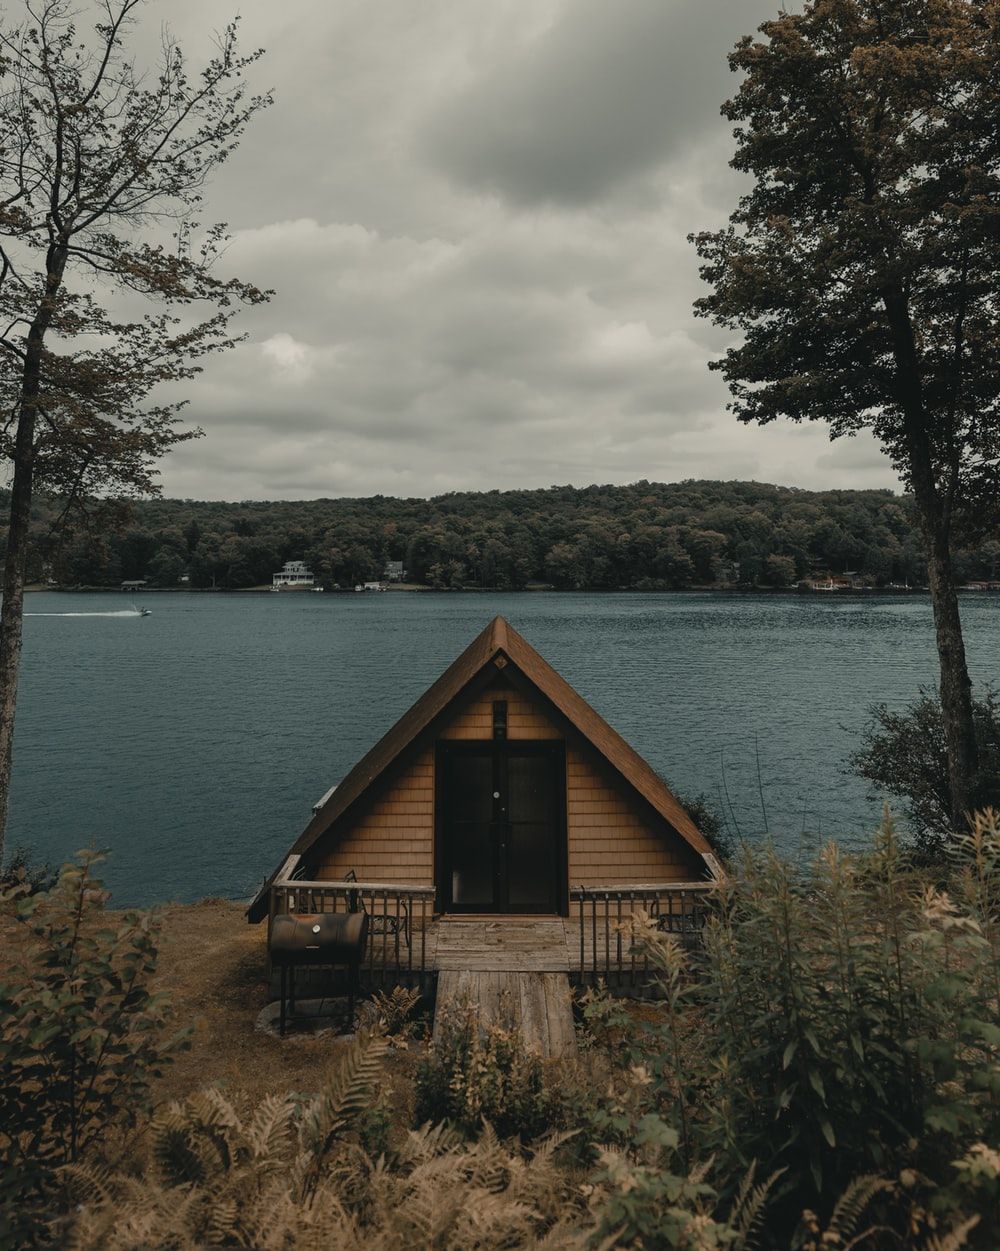 Cabin On Lake Picture. Download Free Image